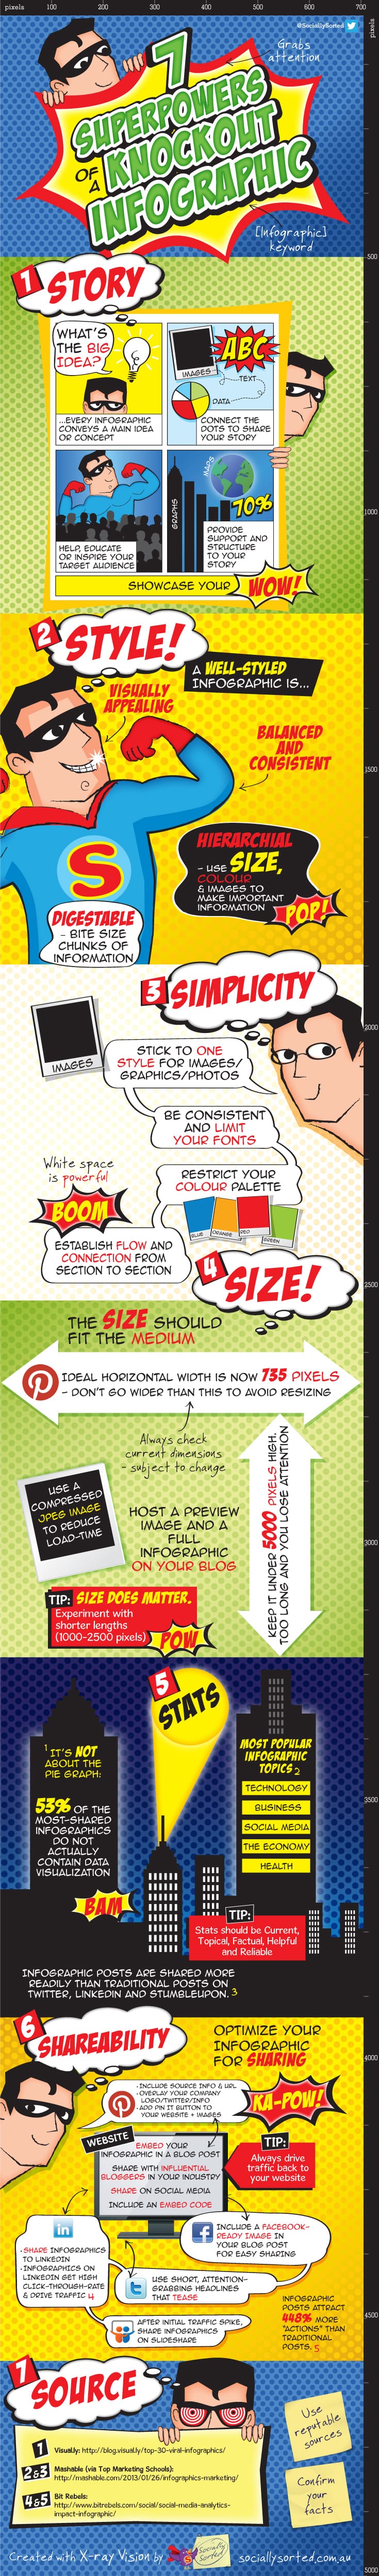 7 Superpowers of a Knockout Infographic - Make your own infographic